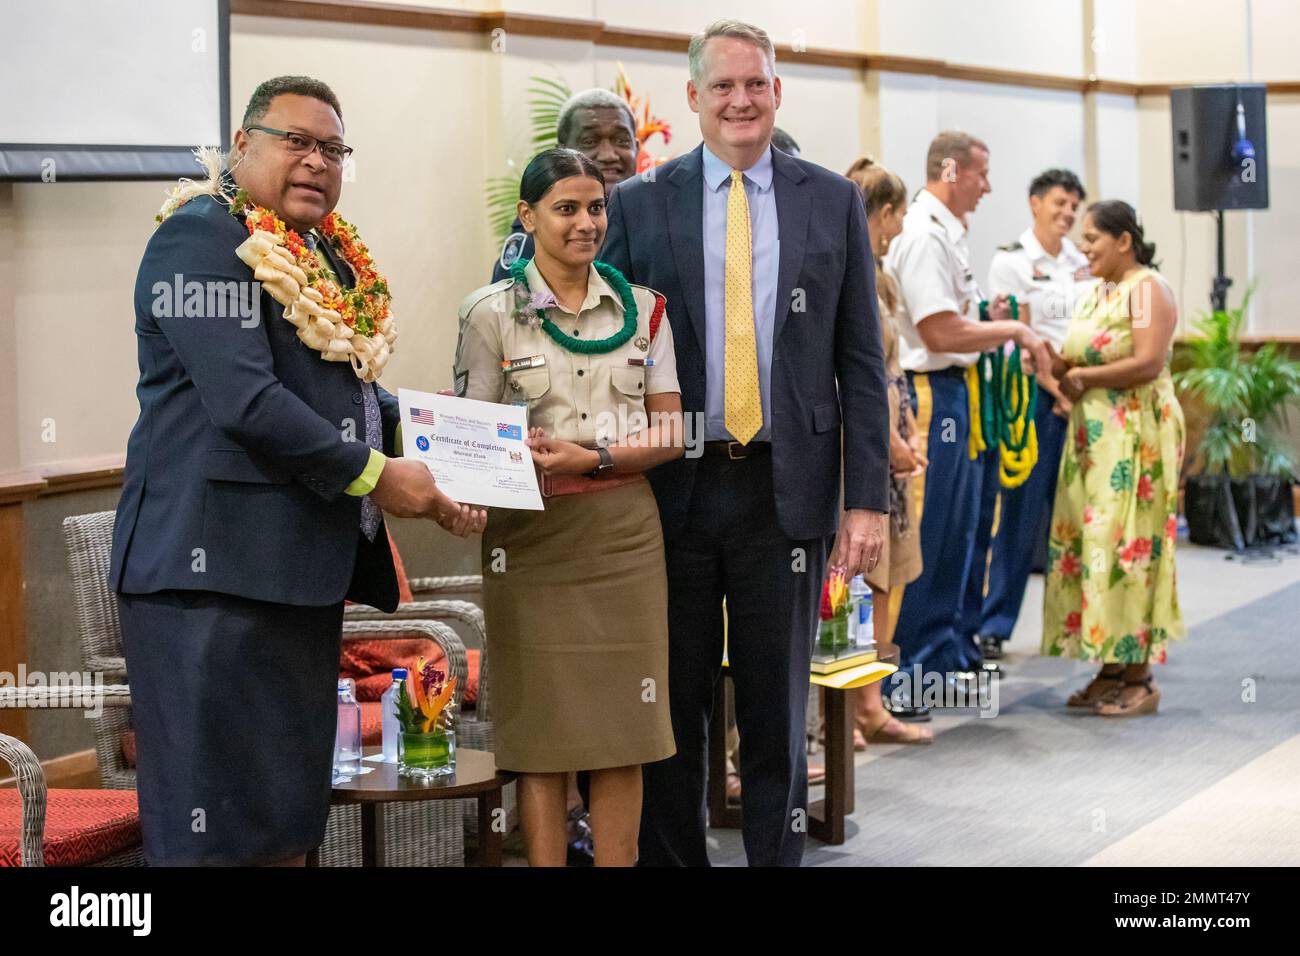 From left, Permanent Secretary Manasa Lesuma, with the Ministry of Defence, Sgt. Sheemal Nand, with the Republic of Fiji Military Forces, and Chargé d’Affaires Antone Greubel, with the U.S. Embassy – Suva, pose for a photo at the closing ceremony for Fiji’s first Women, Peace and Security National Action Plan Orientation Workshop at The Grand Pacific Hotel in Suva, Fiji, Sept. 23, 2022. Nand received a certificate for completing the workshop and contributing toward a Fiji WPS strategy. Stock Photo